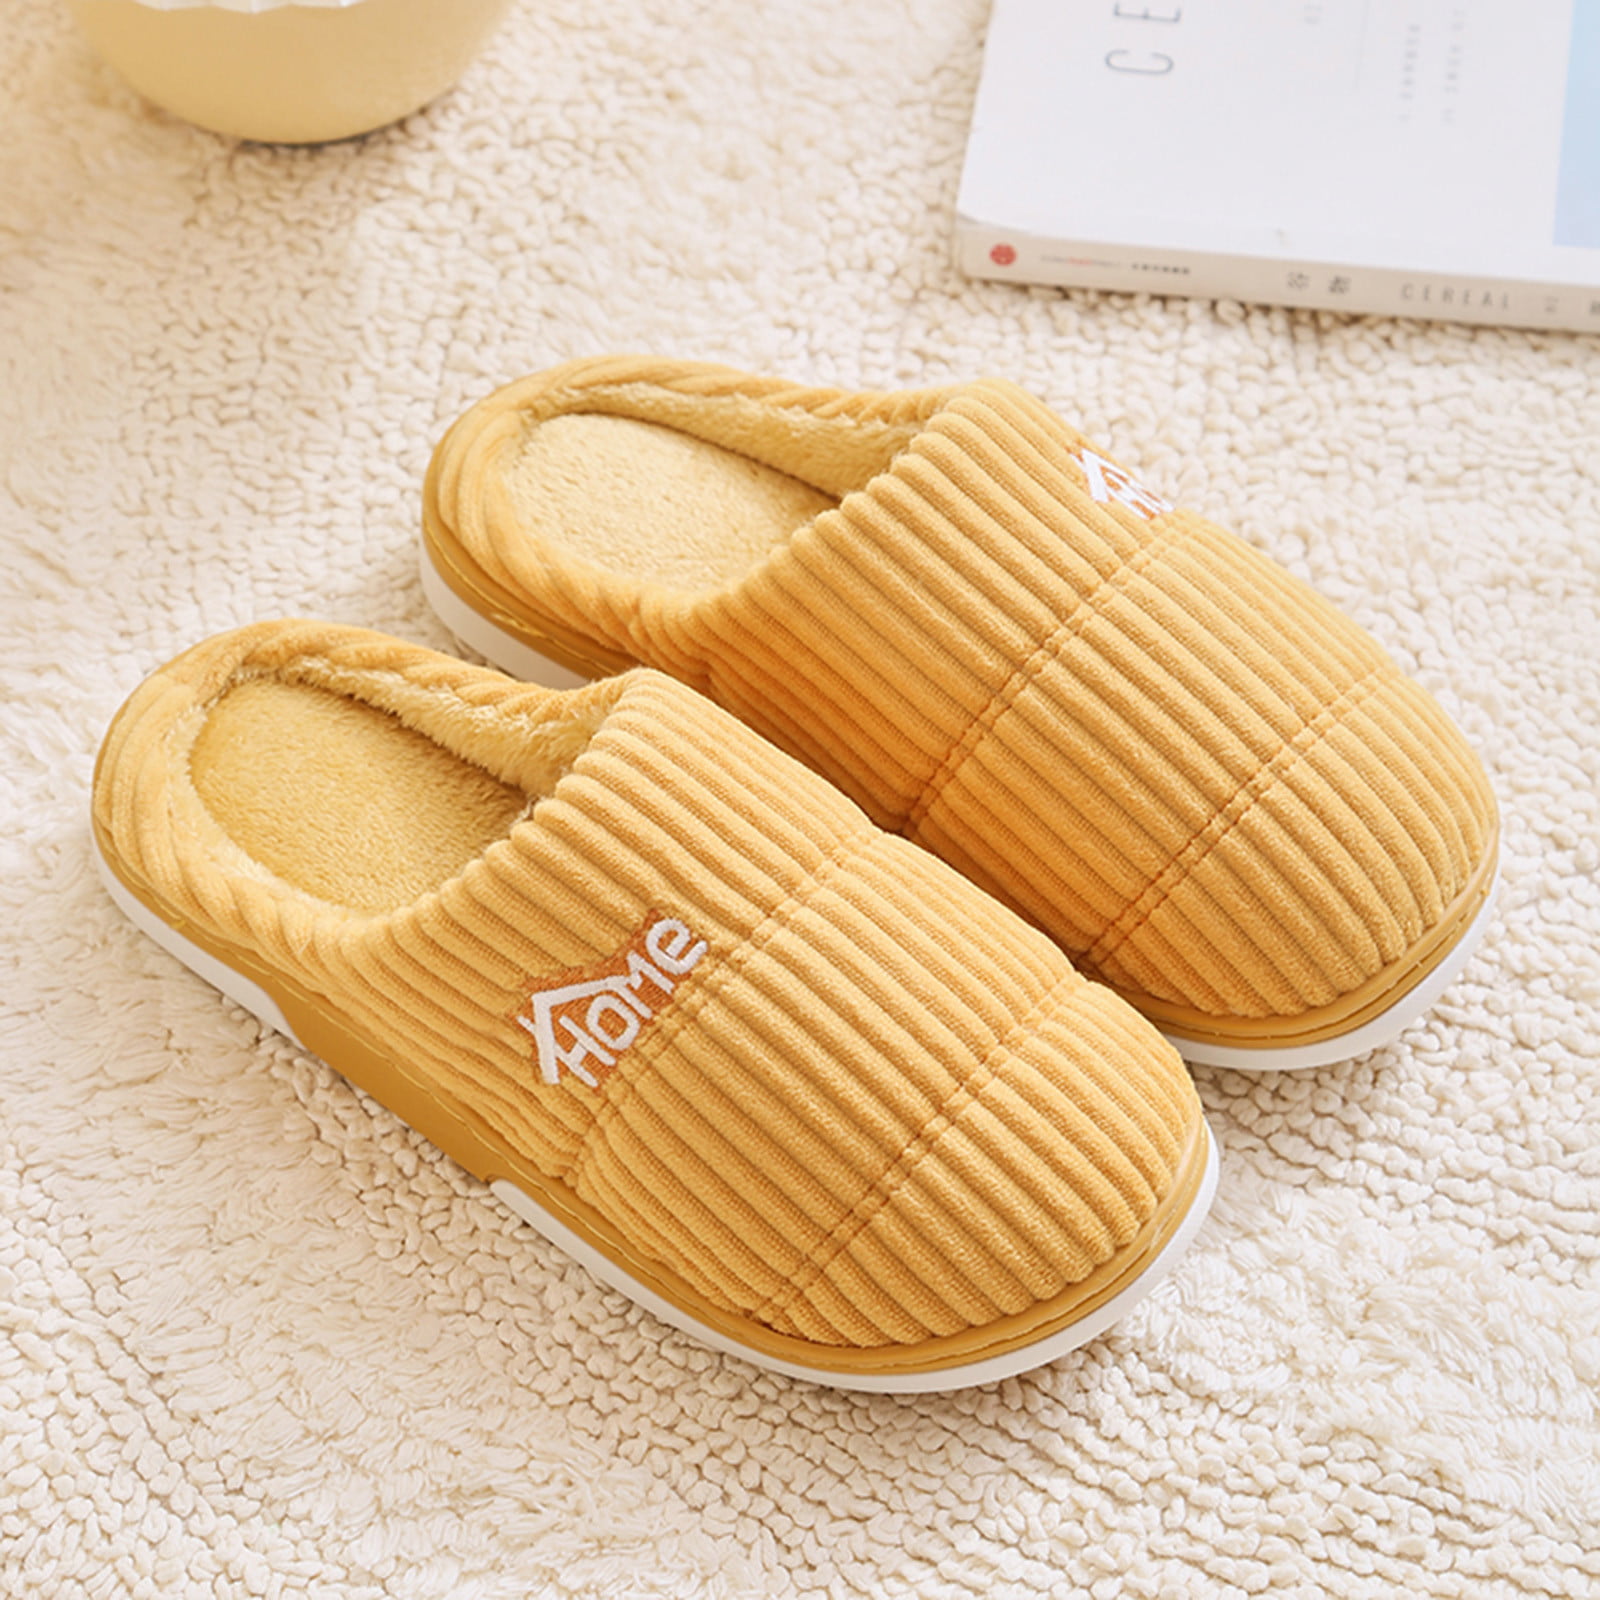 Sequins Plush Slipper For Women Girls Fashion Kawaii Fluffy Winter Warm  Slippers Woman House Cotton Slippers Ladies Bling Shoes - Women's Slippers  - AliExpress